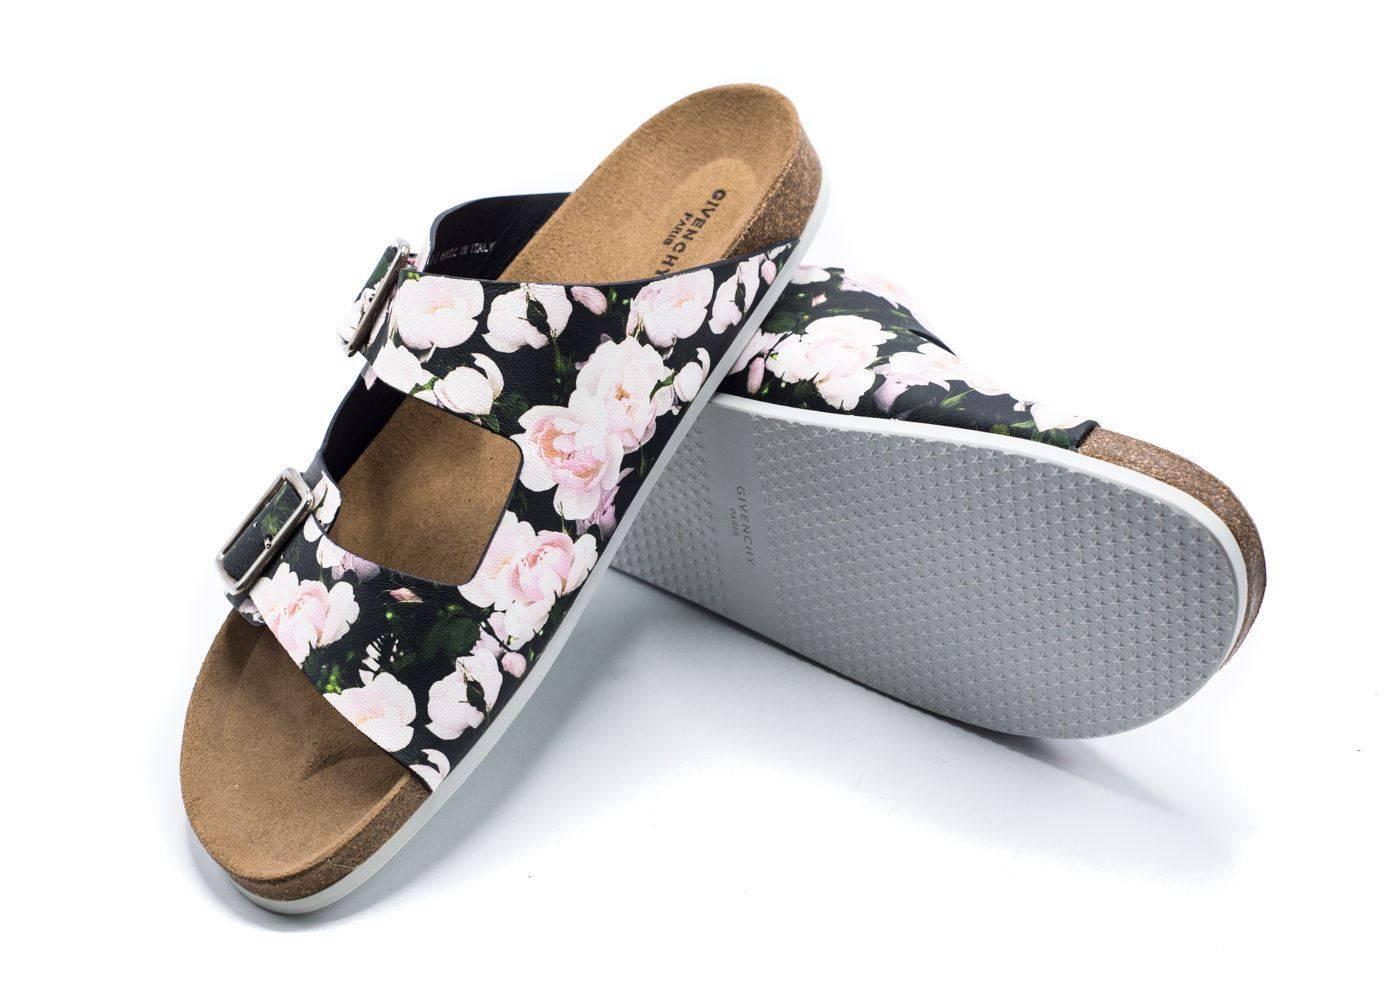 Givenchy Men's Leather Floral Print Slipper Slip Ons In New Condition For Sale In Brooklyn, NY